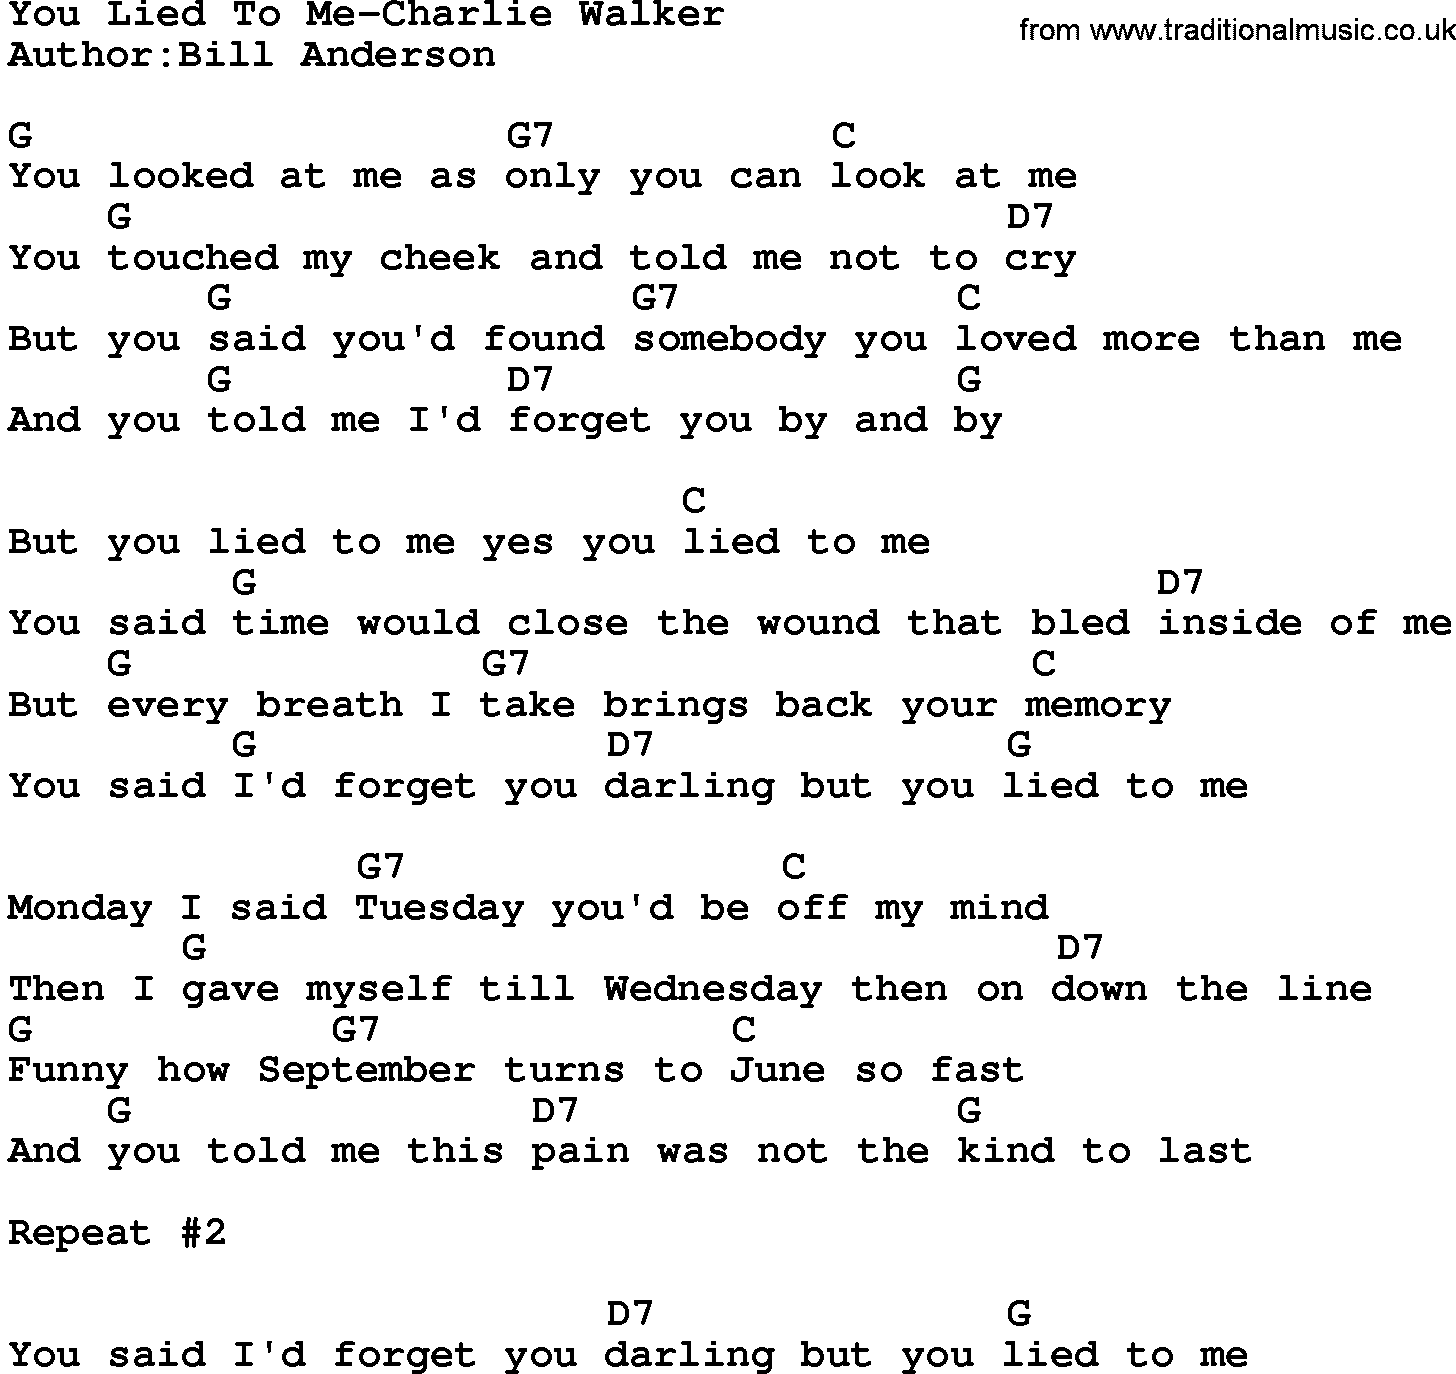 Country music song: You Lied To Me-Charlie Walker lyrics and chords